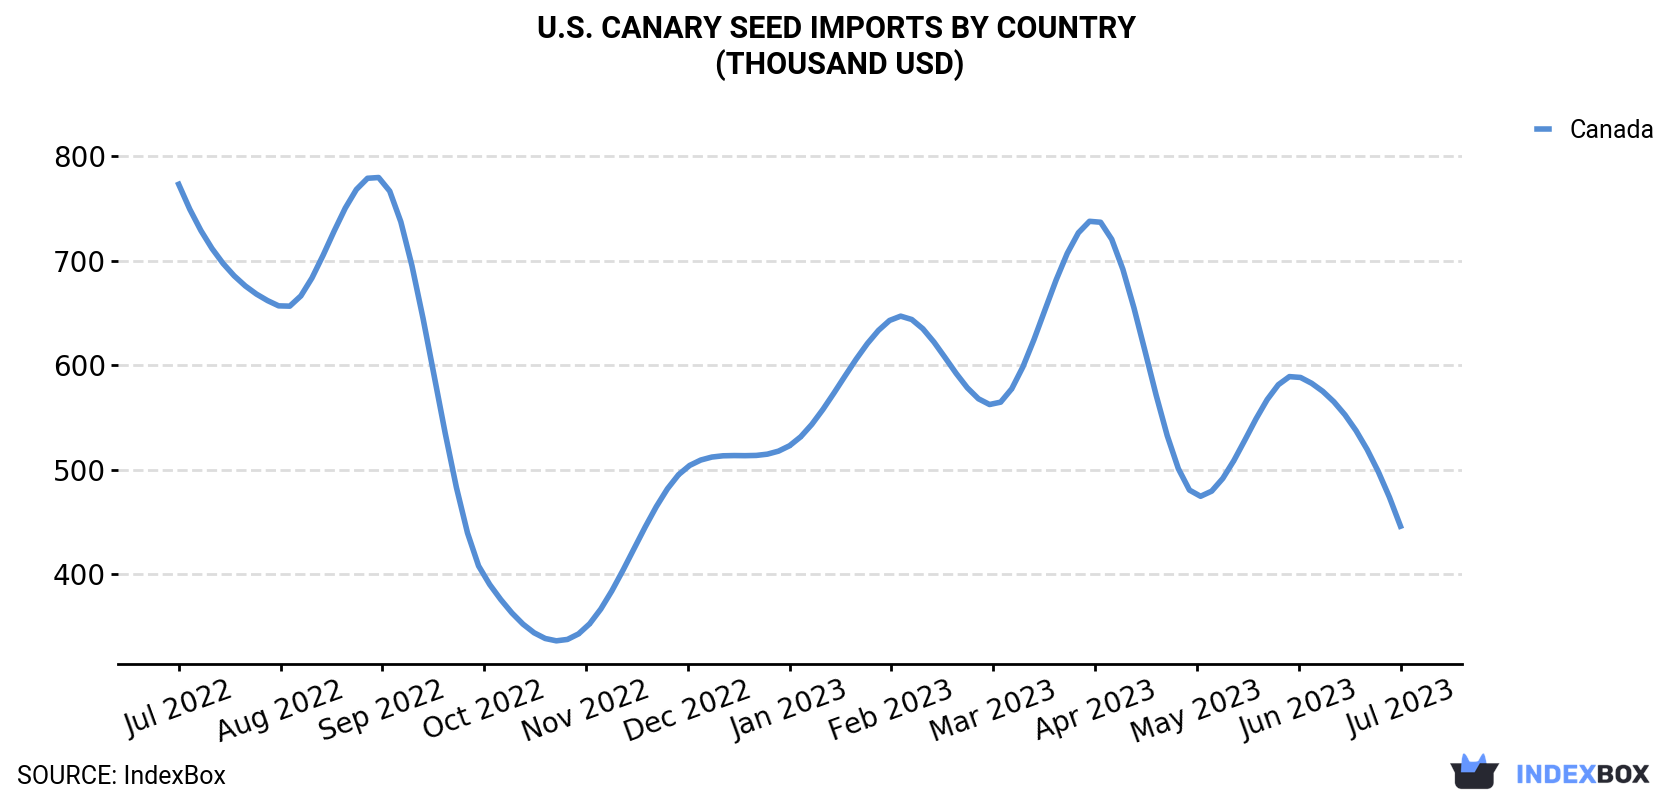 U.S. Canary Seed Imports By Country (Thousand USD)